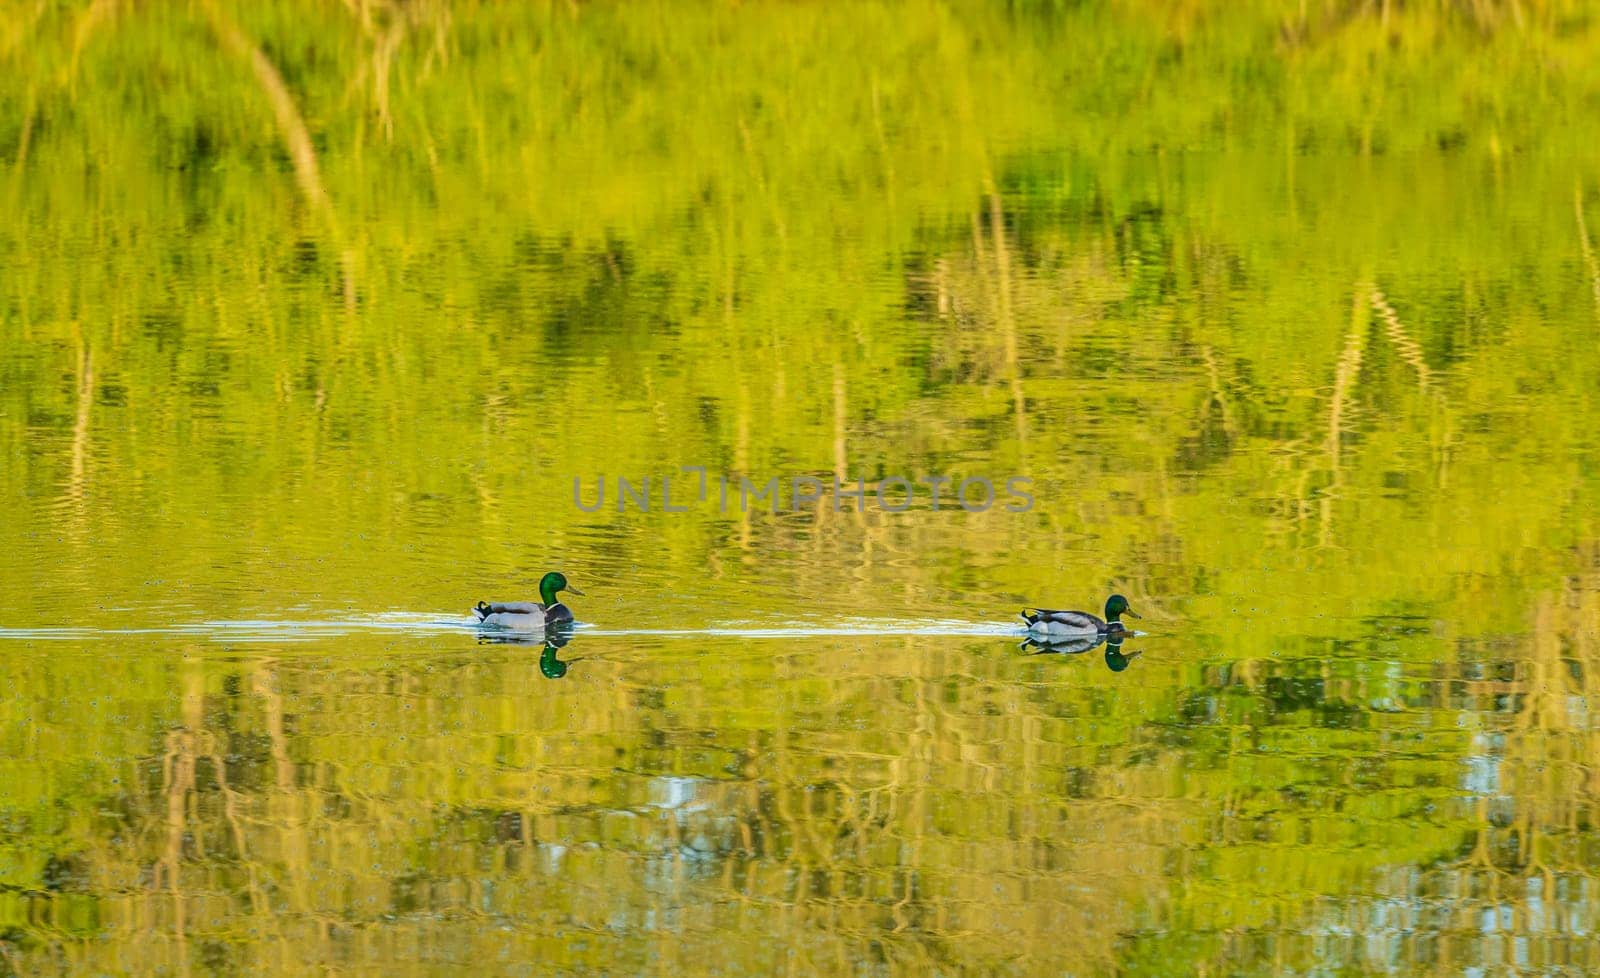 Pair of ducks floating across a reflection of trees in the calm water of lake